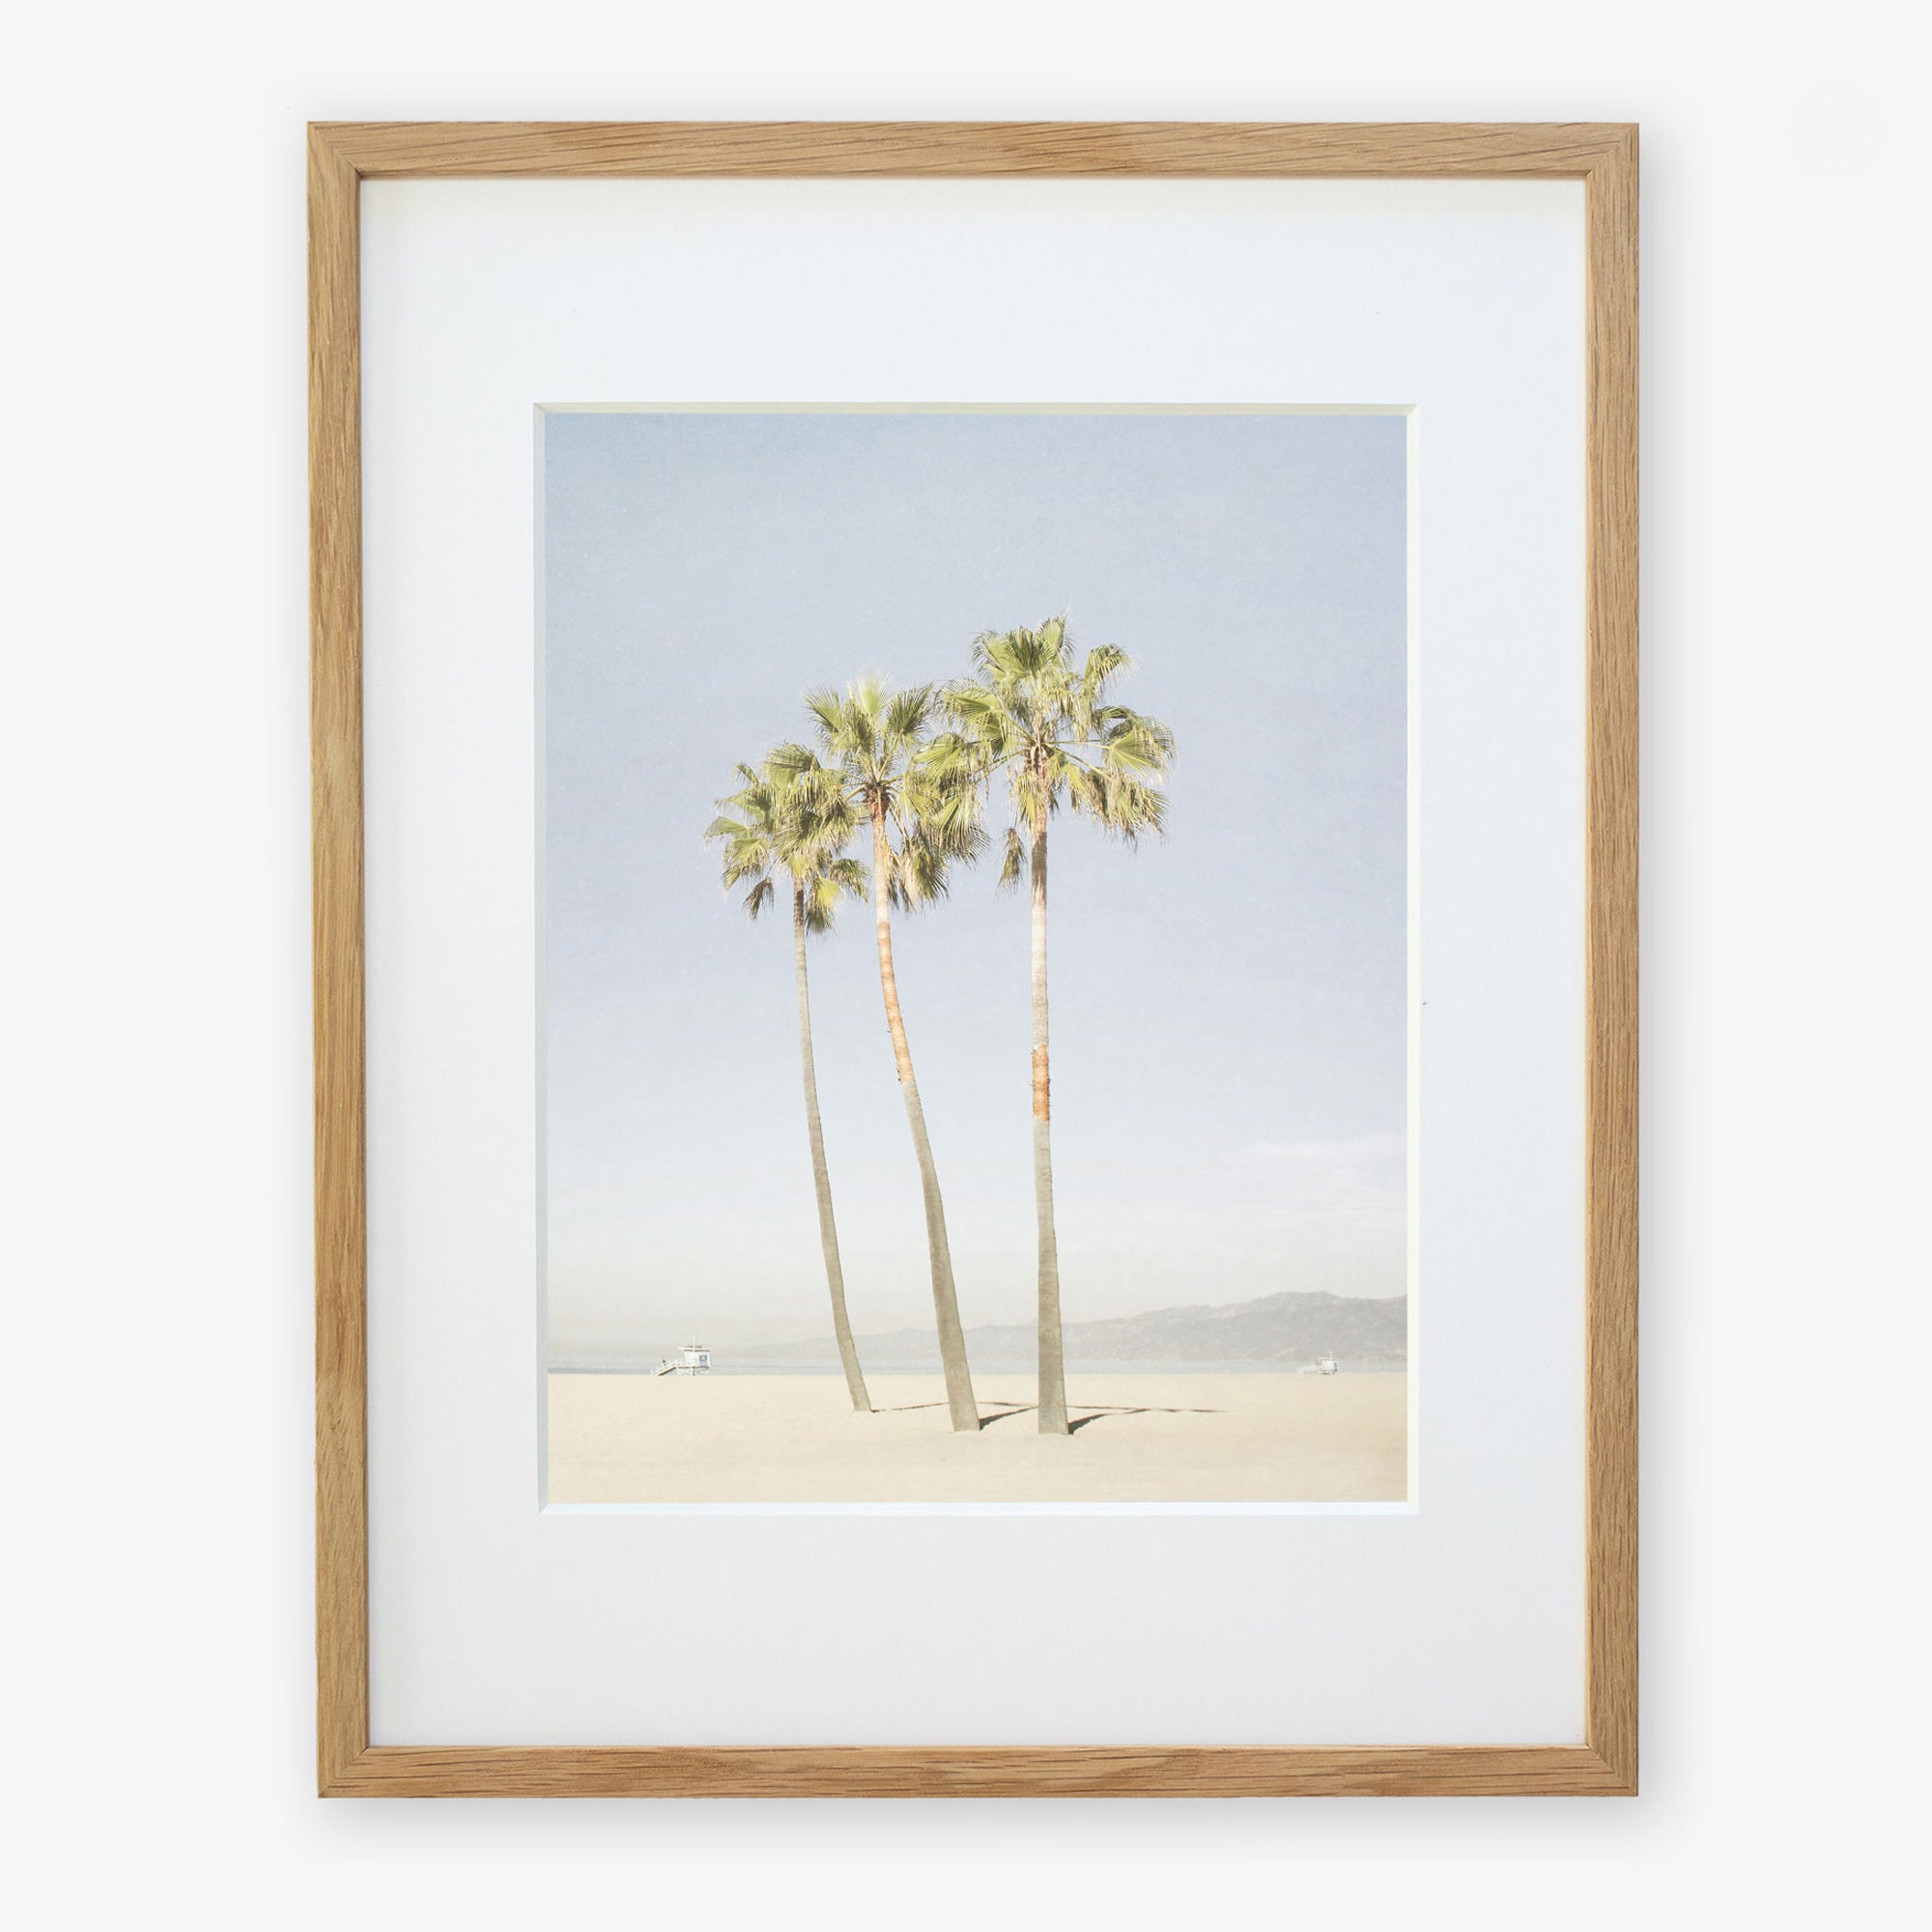 Framed artwork depicting three tall palm trees under a clear sky, with a small figure and a dog at the base, possibly on Venice Beach. The frame is simple and made of light wood. This is the Offley Green California Venice Beach Print, 'Three Palms'.